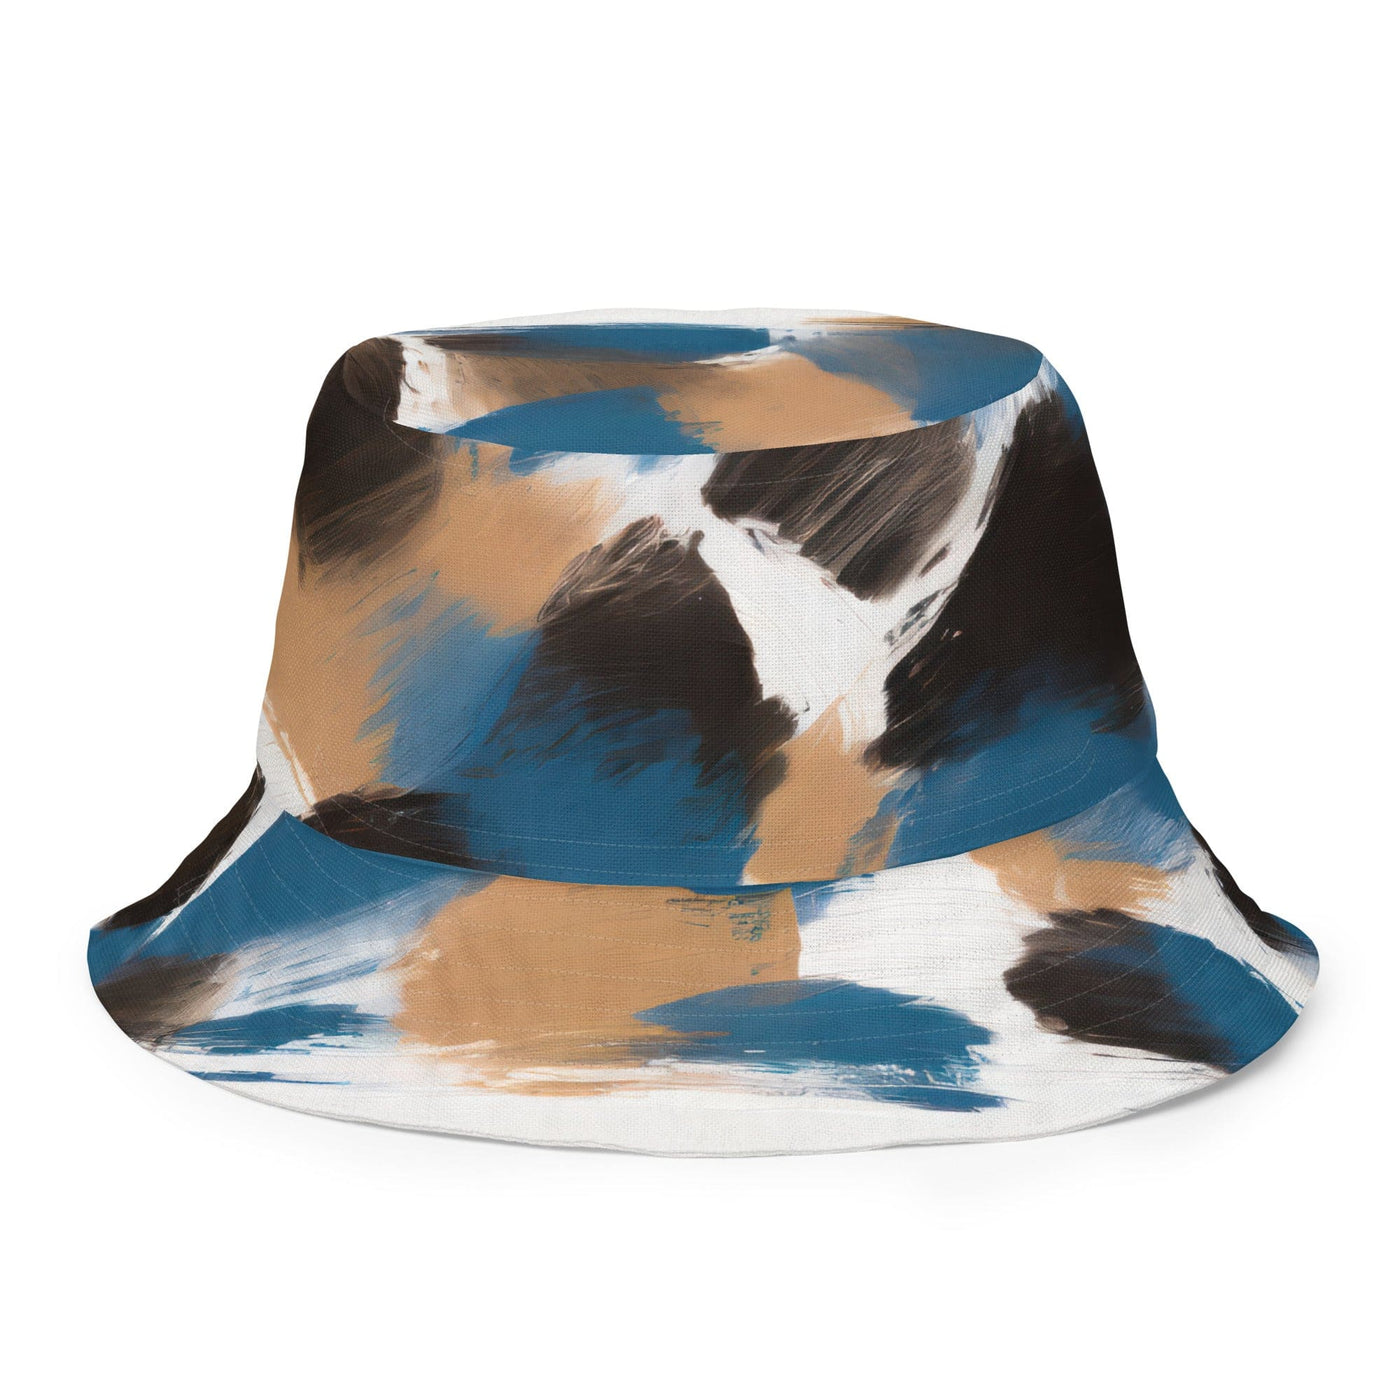 Reversible Bucket Hat Spotted Rustic Blue And Brown